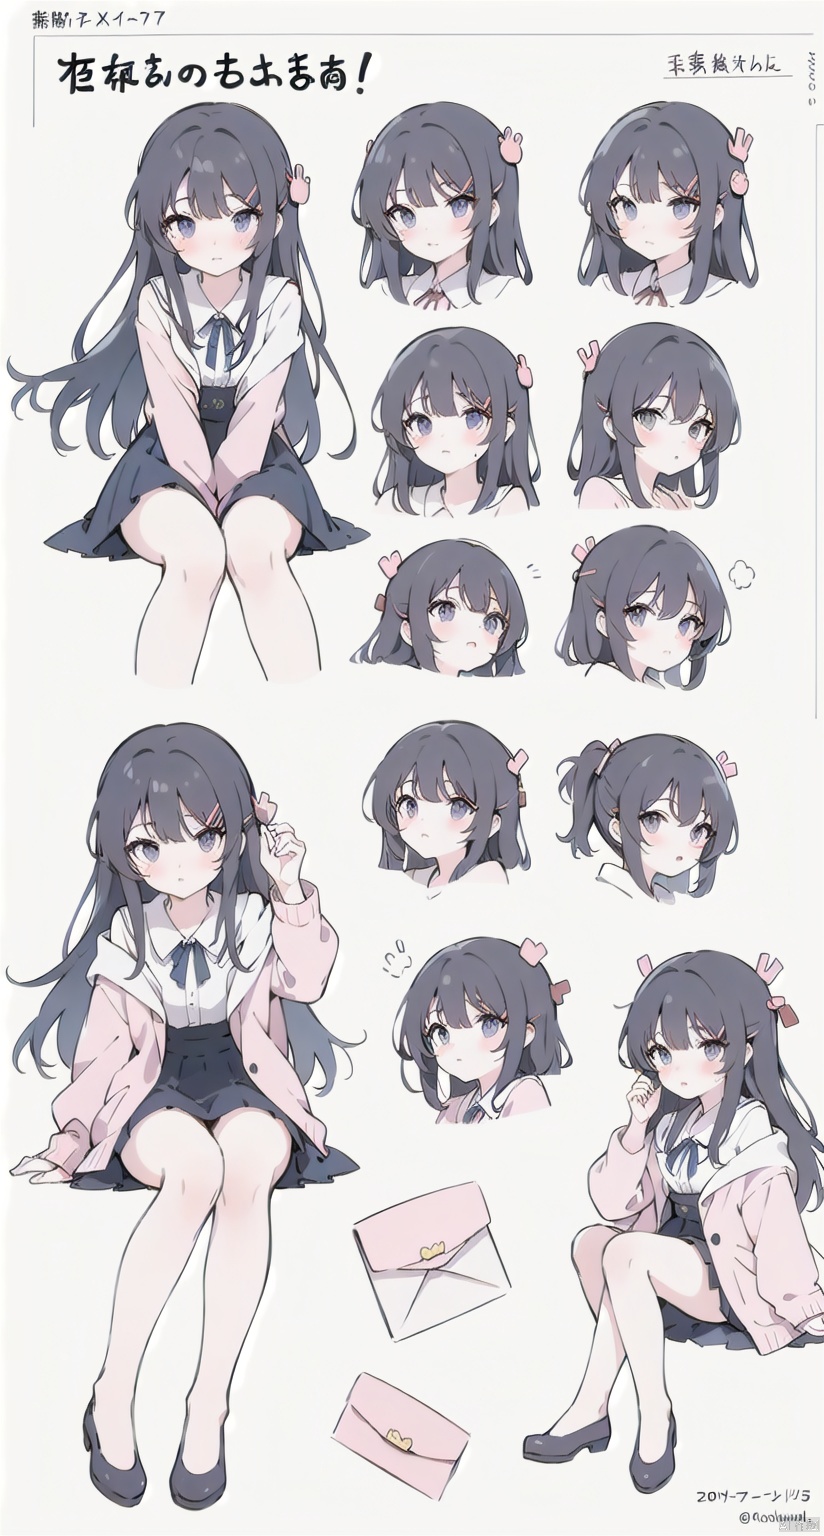 more girl,sakurajima mail,Emoji packs, various actions and expressions, stickers,(blush:1.4),sitting,panorama,column lineup,expressions,three views from front, back and side, costume setup materials,reference sheet